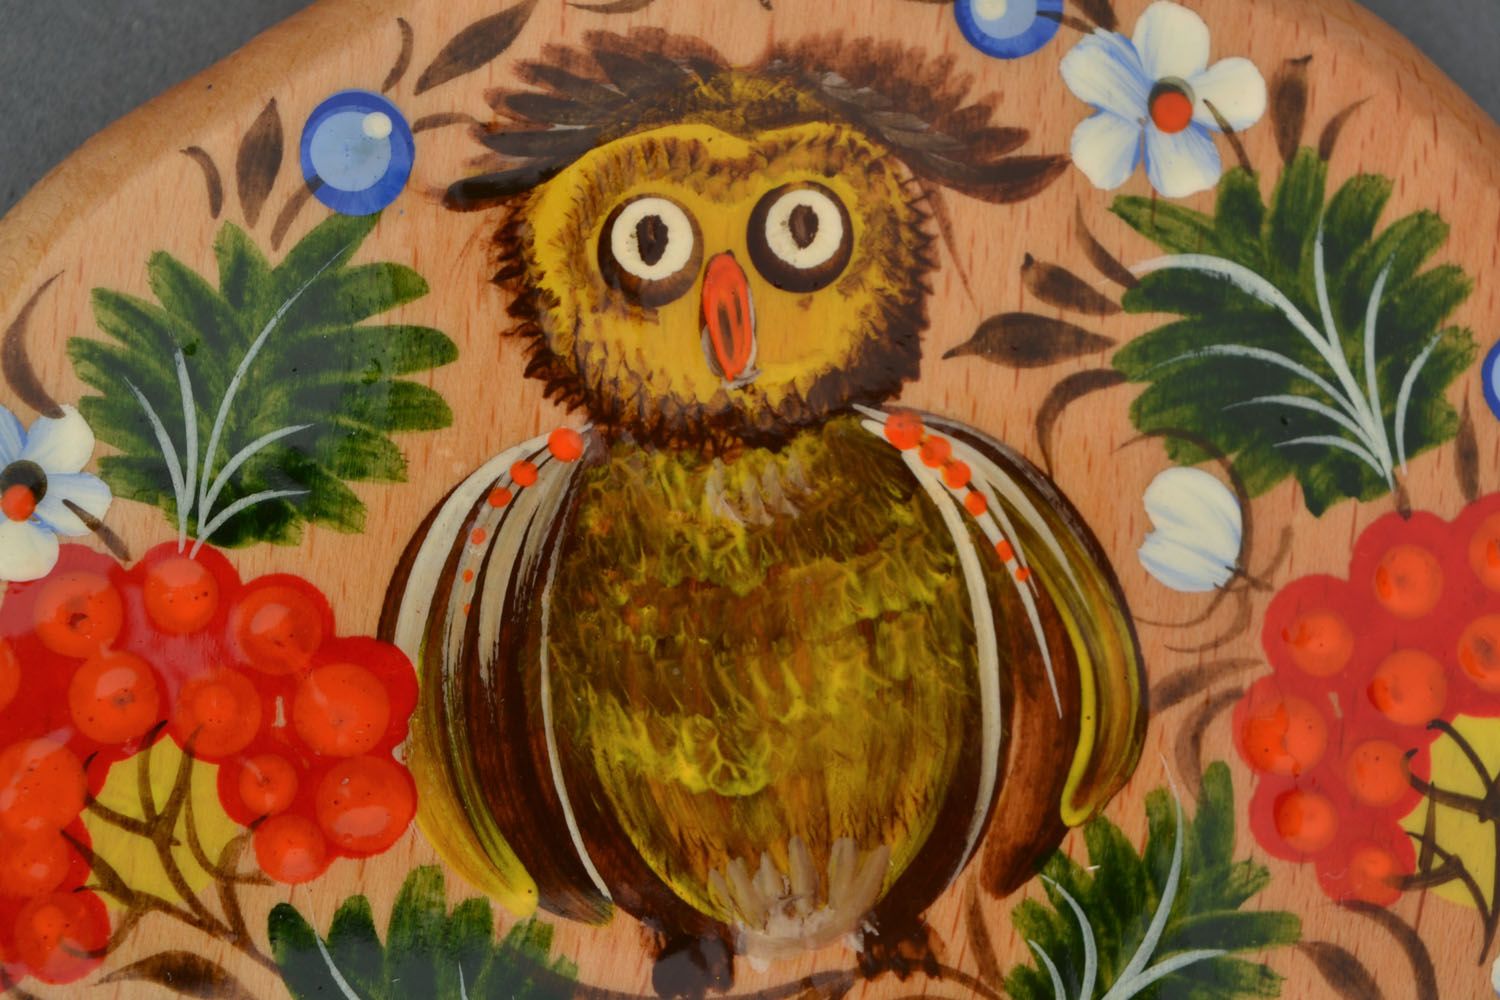 Chopping board with the owl image photo 5